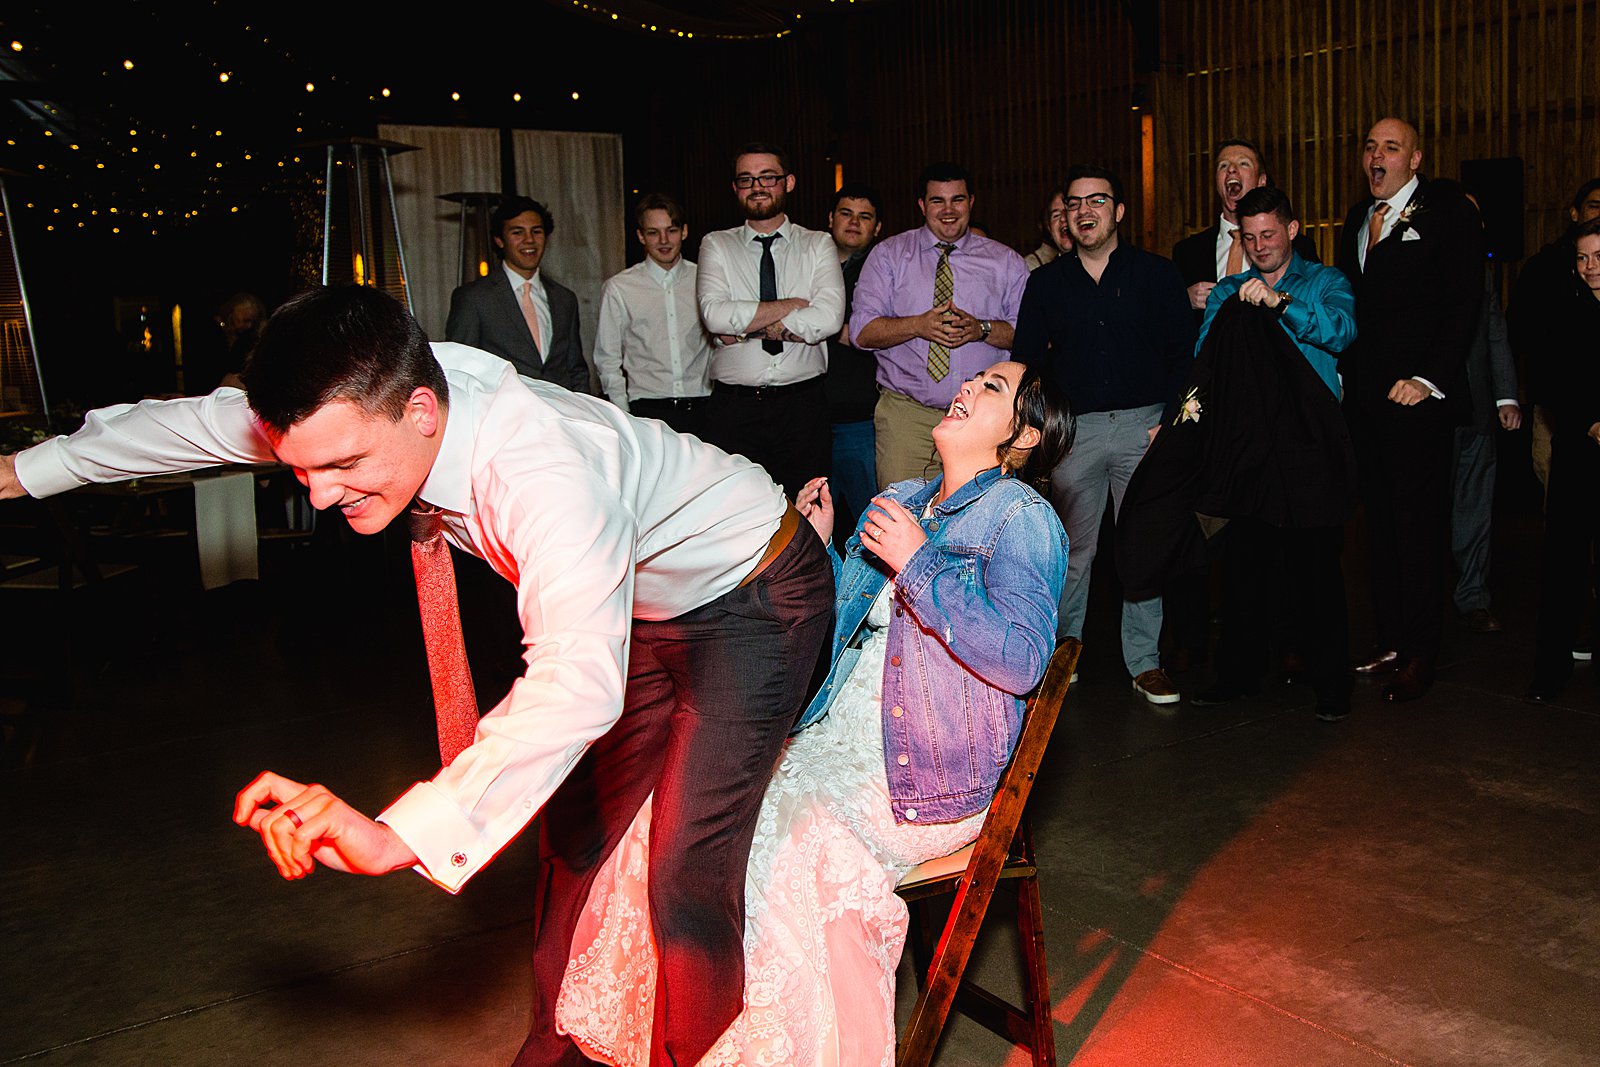 Garter toss at The Paseo wedding reception by Apache Junction wedding photographer PMA Photography.